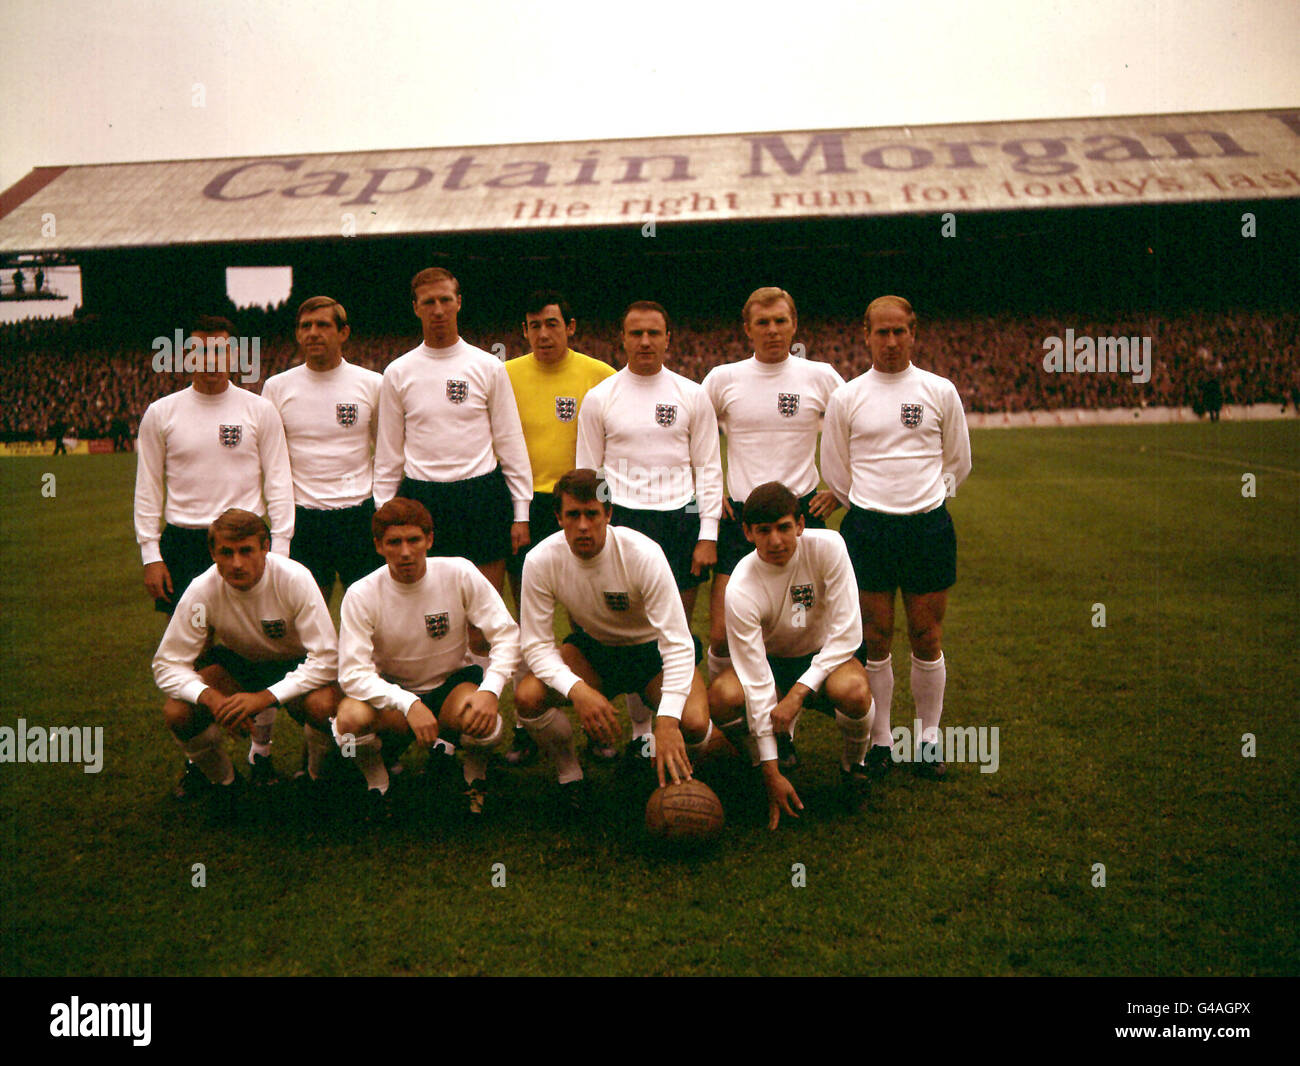 PA NEWS PHOTO 1968 THE ENGLAND INTERNATIONAL FOOTBALL TEAM WHICH BEAT WALES AT CARDIFF. (FROM LEFT TO RIGHT BACK ROW) ALAN MULLERY, KEITH NEWTON, JACK CHARLTON, GORDON BANKS, GEORGE COHEN, BOBBY MOORE, BOBBY CHARLTON. (FROM LEFT TO RIGHT FRONT ROW) ROGER HUNT, ALAN BALL, GEOFF HURST AND MARTIN PETERS Stock Photo